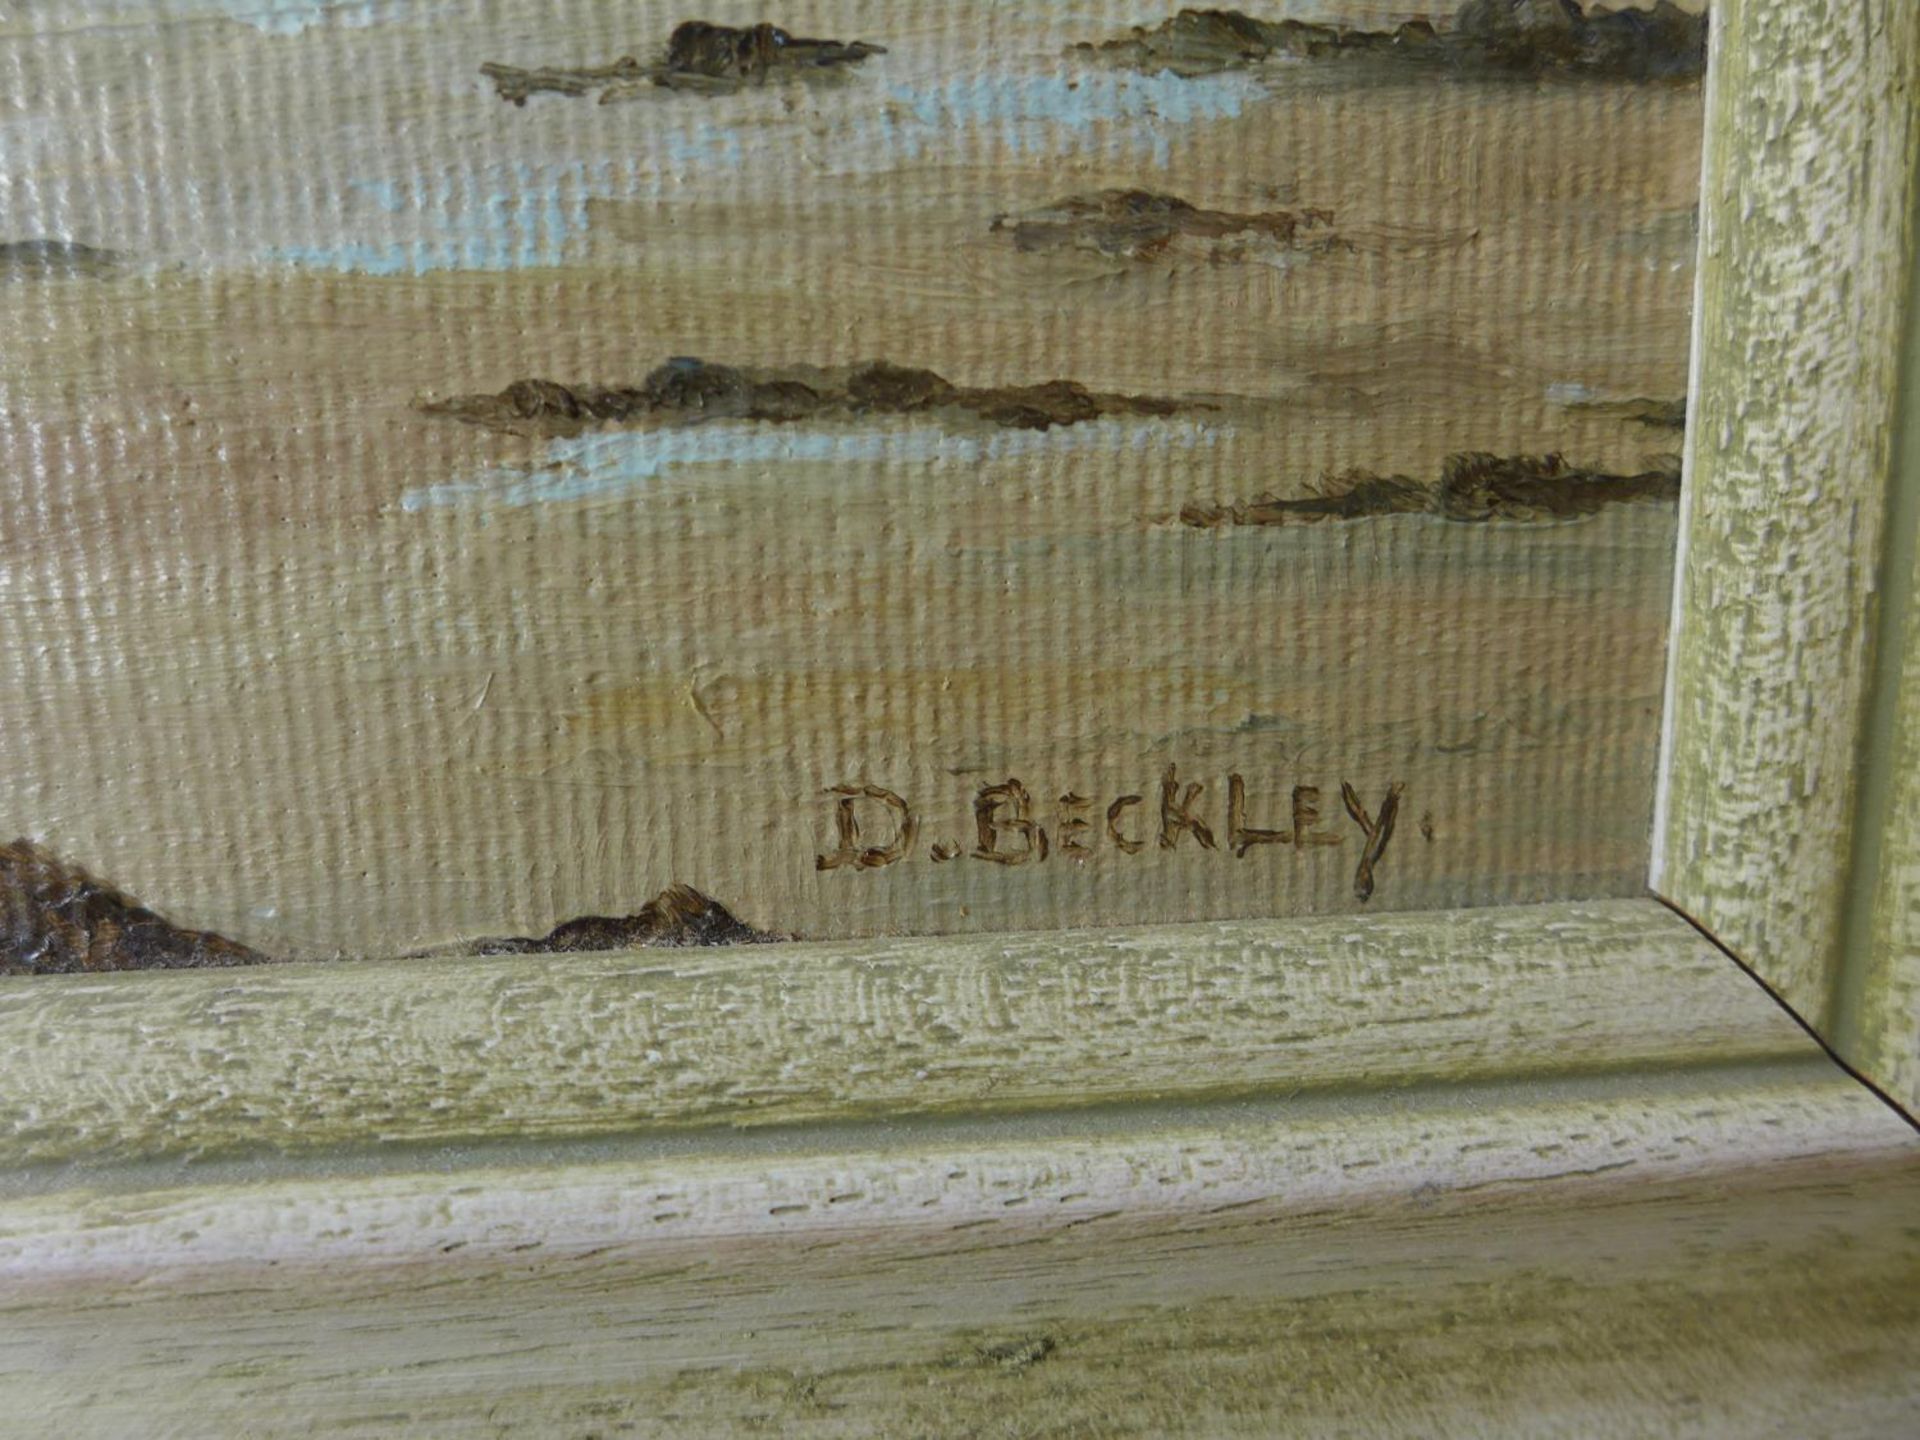 D BECKLEY (BRITISH 20TH CENTURY) 'SEA VIEW ISLE OF WIGHT', OIL ON BOARD, SIGNED, 25X32CM, FRAMED - Image 2 of 3